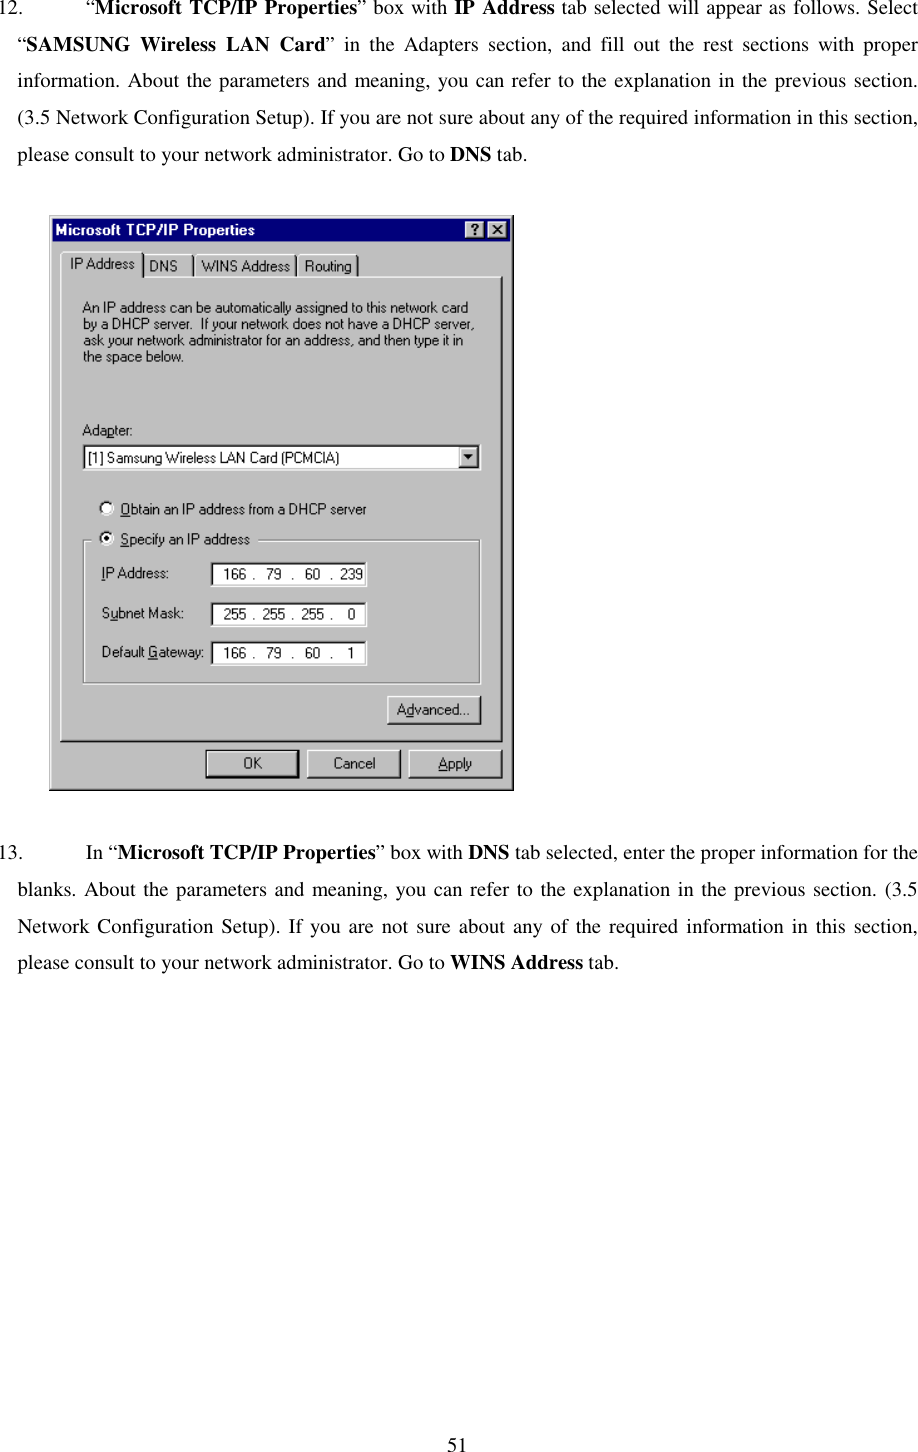   51 12. “Microsoft TCP/IP Properties” box with IP Address tab selected will appear as follows. Select “SAMSUNG Wireless LAN Card” in the Adapters section, and fill out the rest sections with proper information. About the parameters and meaning, you can refer to the explanation in the previous section. (3.5 Network Configuration Setup). If you are not sure about any of the required information in this section, please consult to your network administrator. Go to DNS tab.               13. In “Microsoft TCP/IP Properties” box with DNS tab selected, enter the proper information for the blanks. About the parameters and meaning, you can refer to the explanation in the previous section. (3.5 Network Configuration Setup). If you are not sure about any of the required information in this section,  please consult to your network administrator. Go to WINS Address tab.   